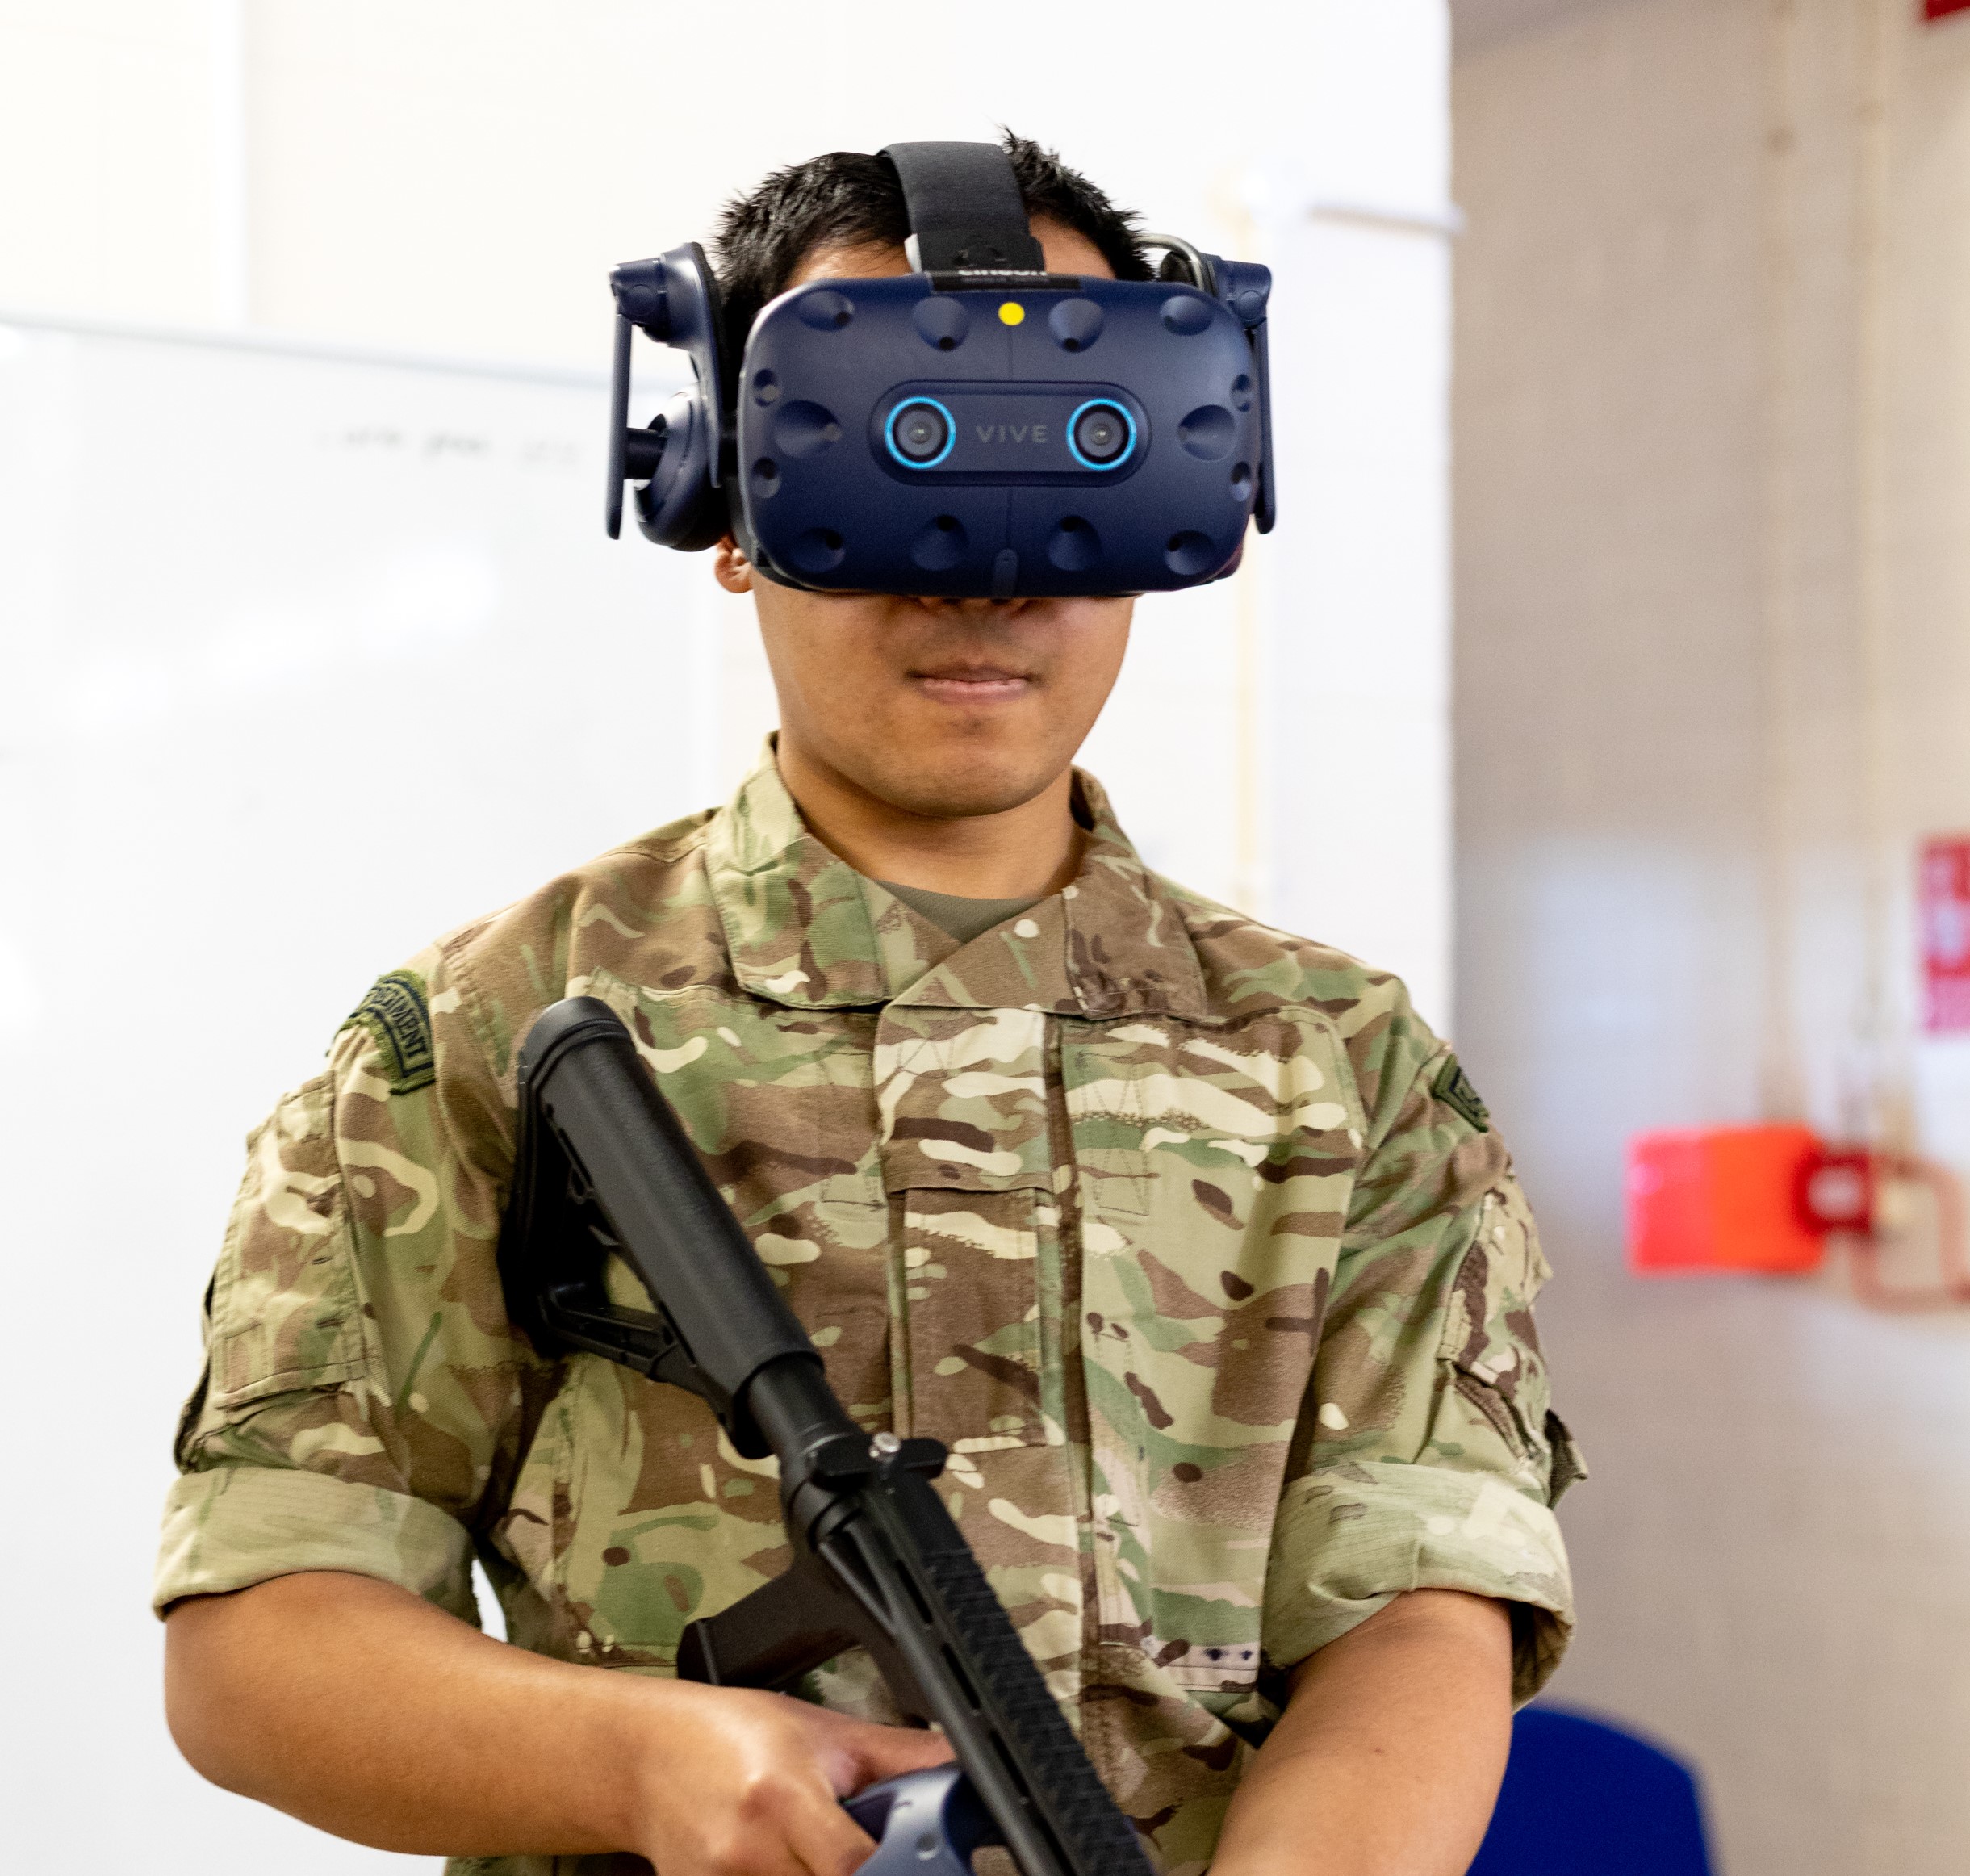 Image shows RAF personnel wearing virtual reality headset and rifle.